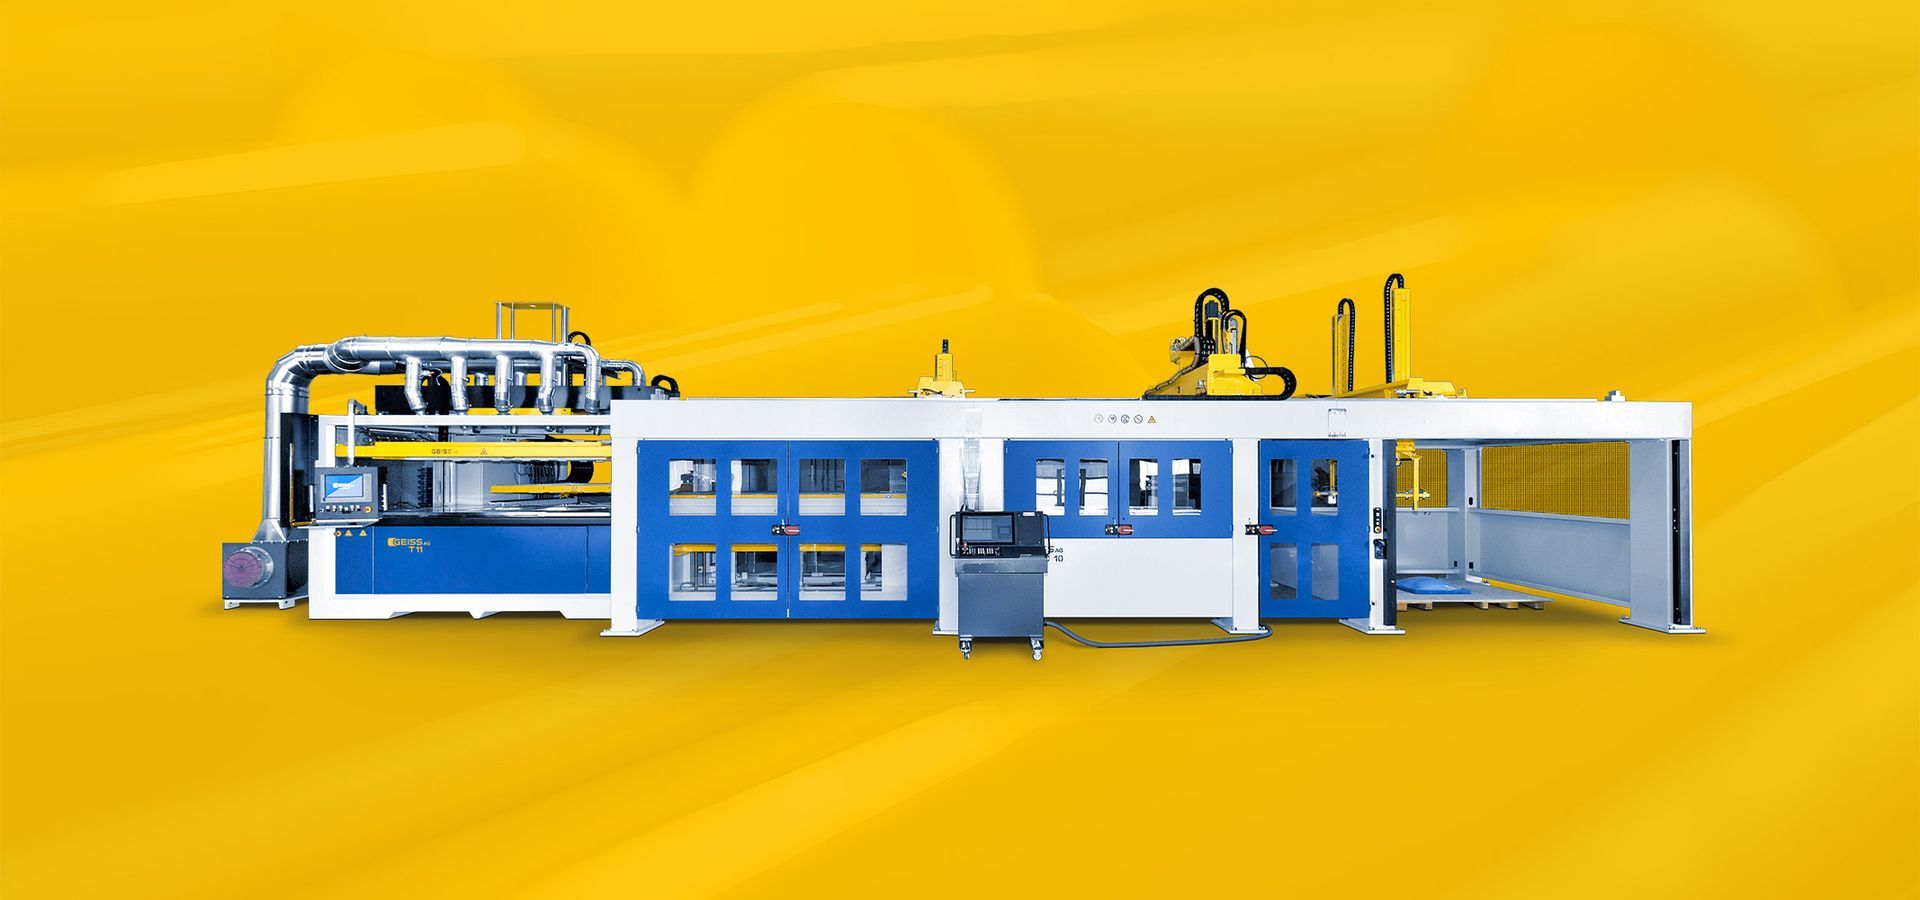 Geiss T11 Thermoforming Machine Yellow Background